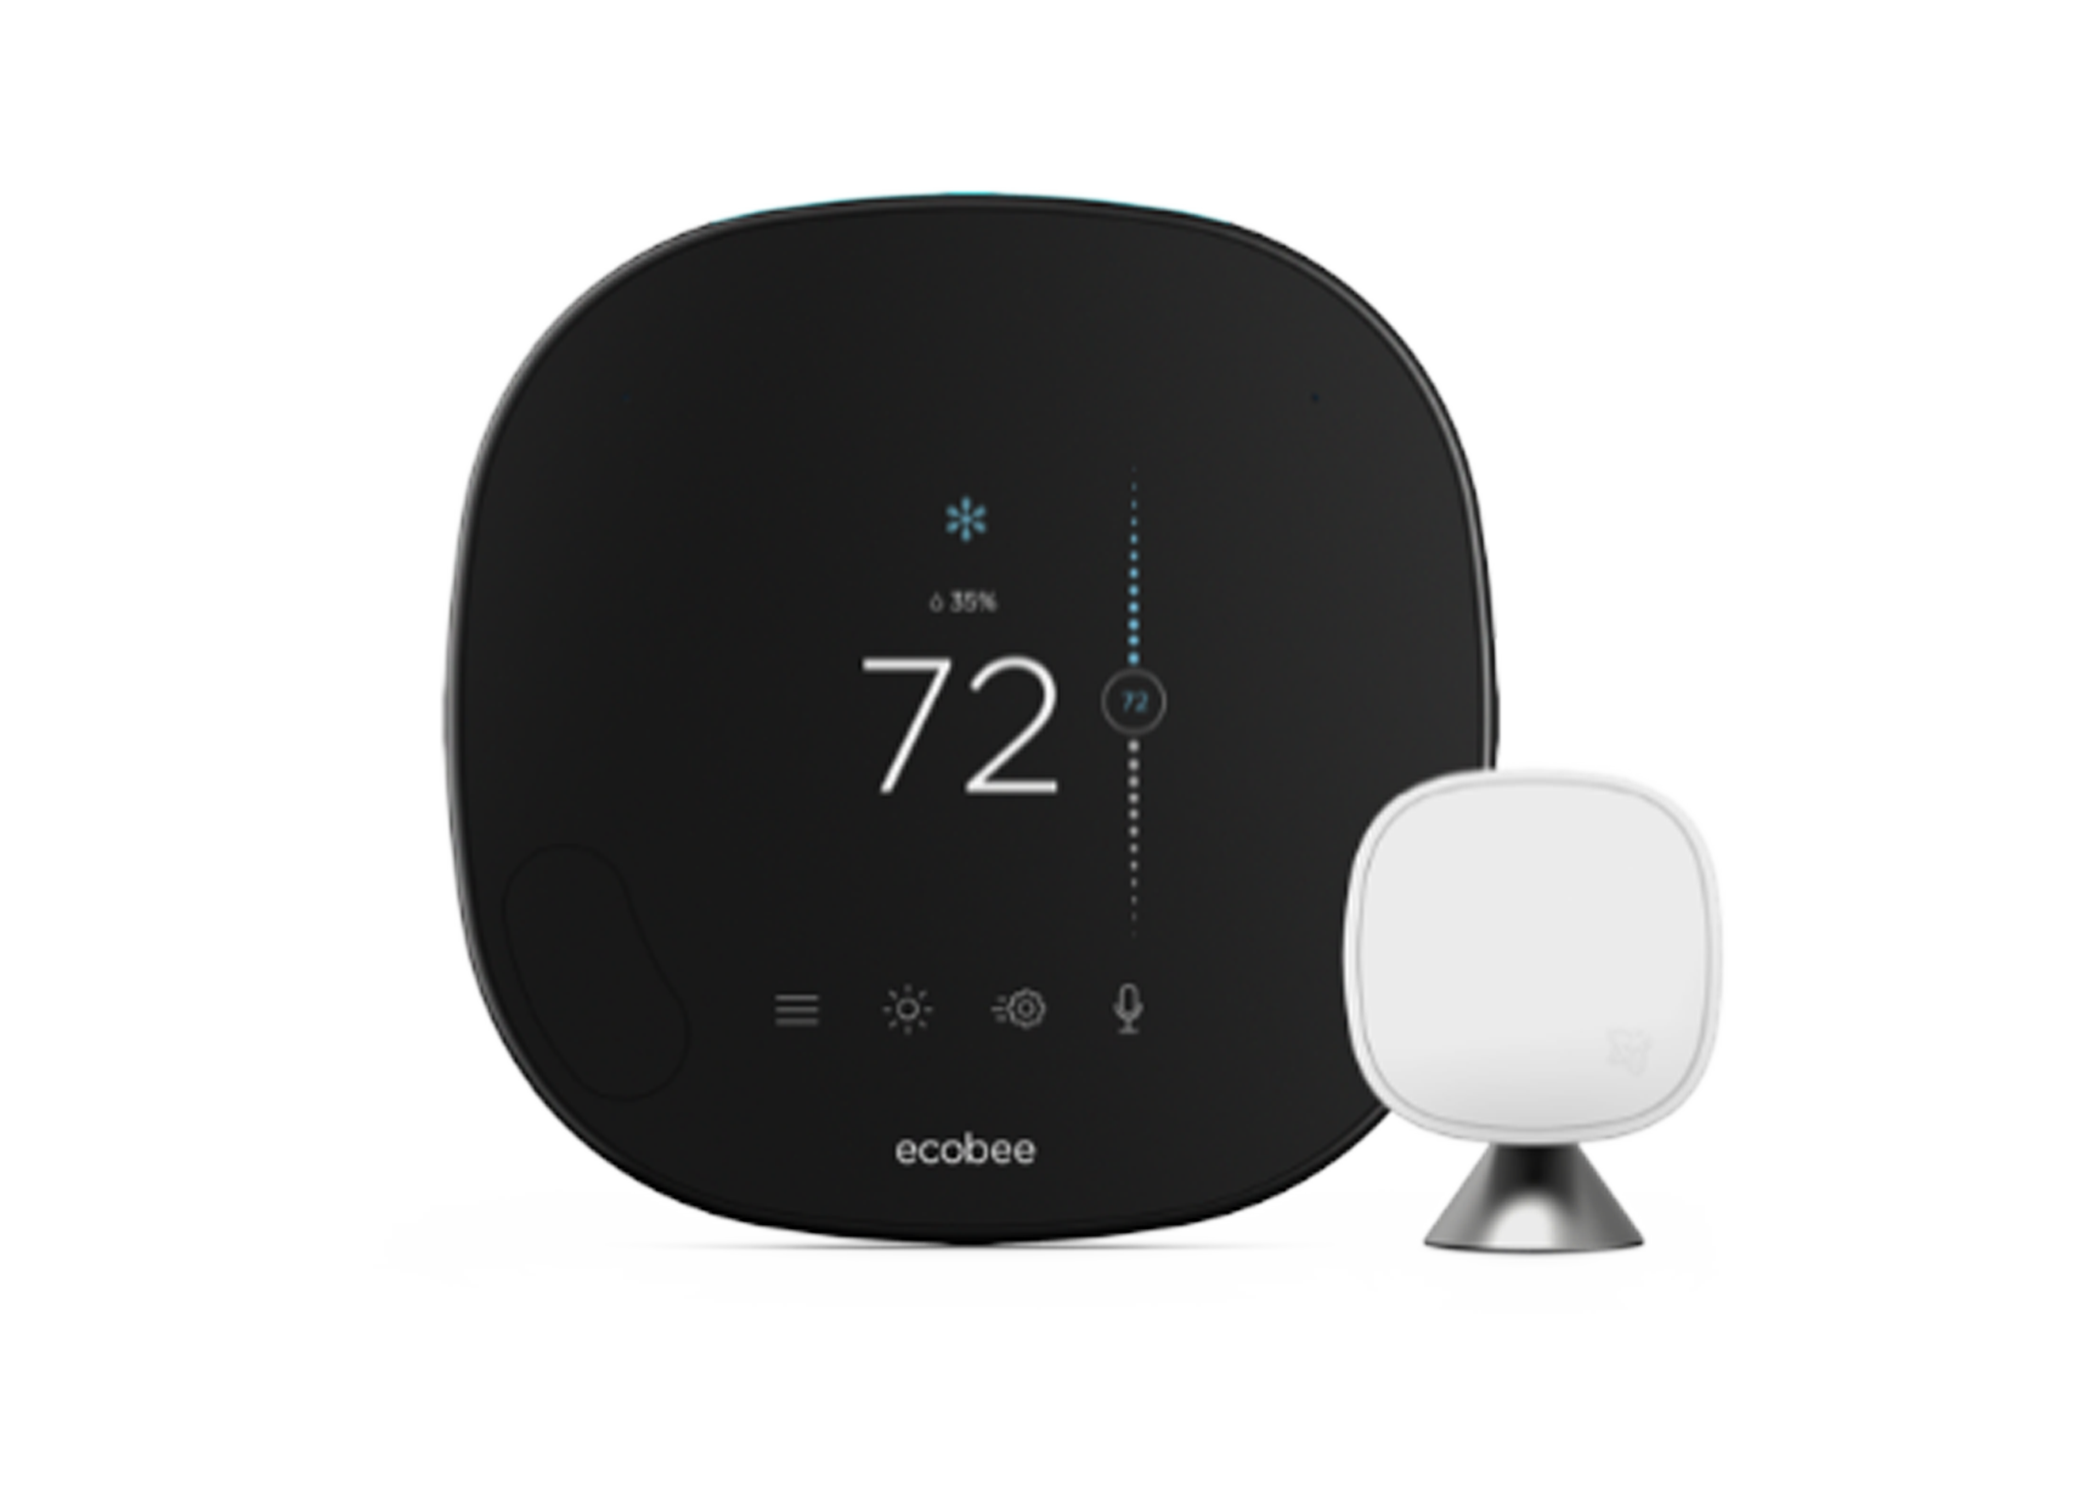 A Ecobee Thermostat